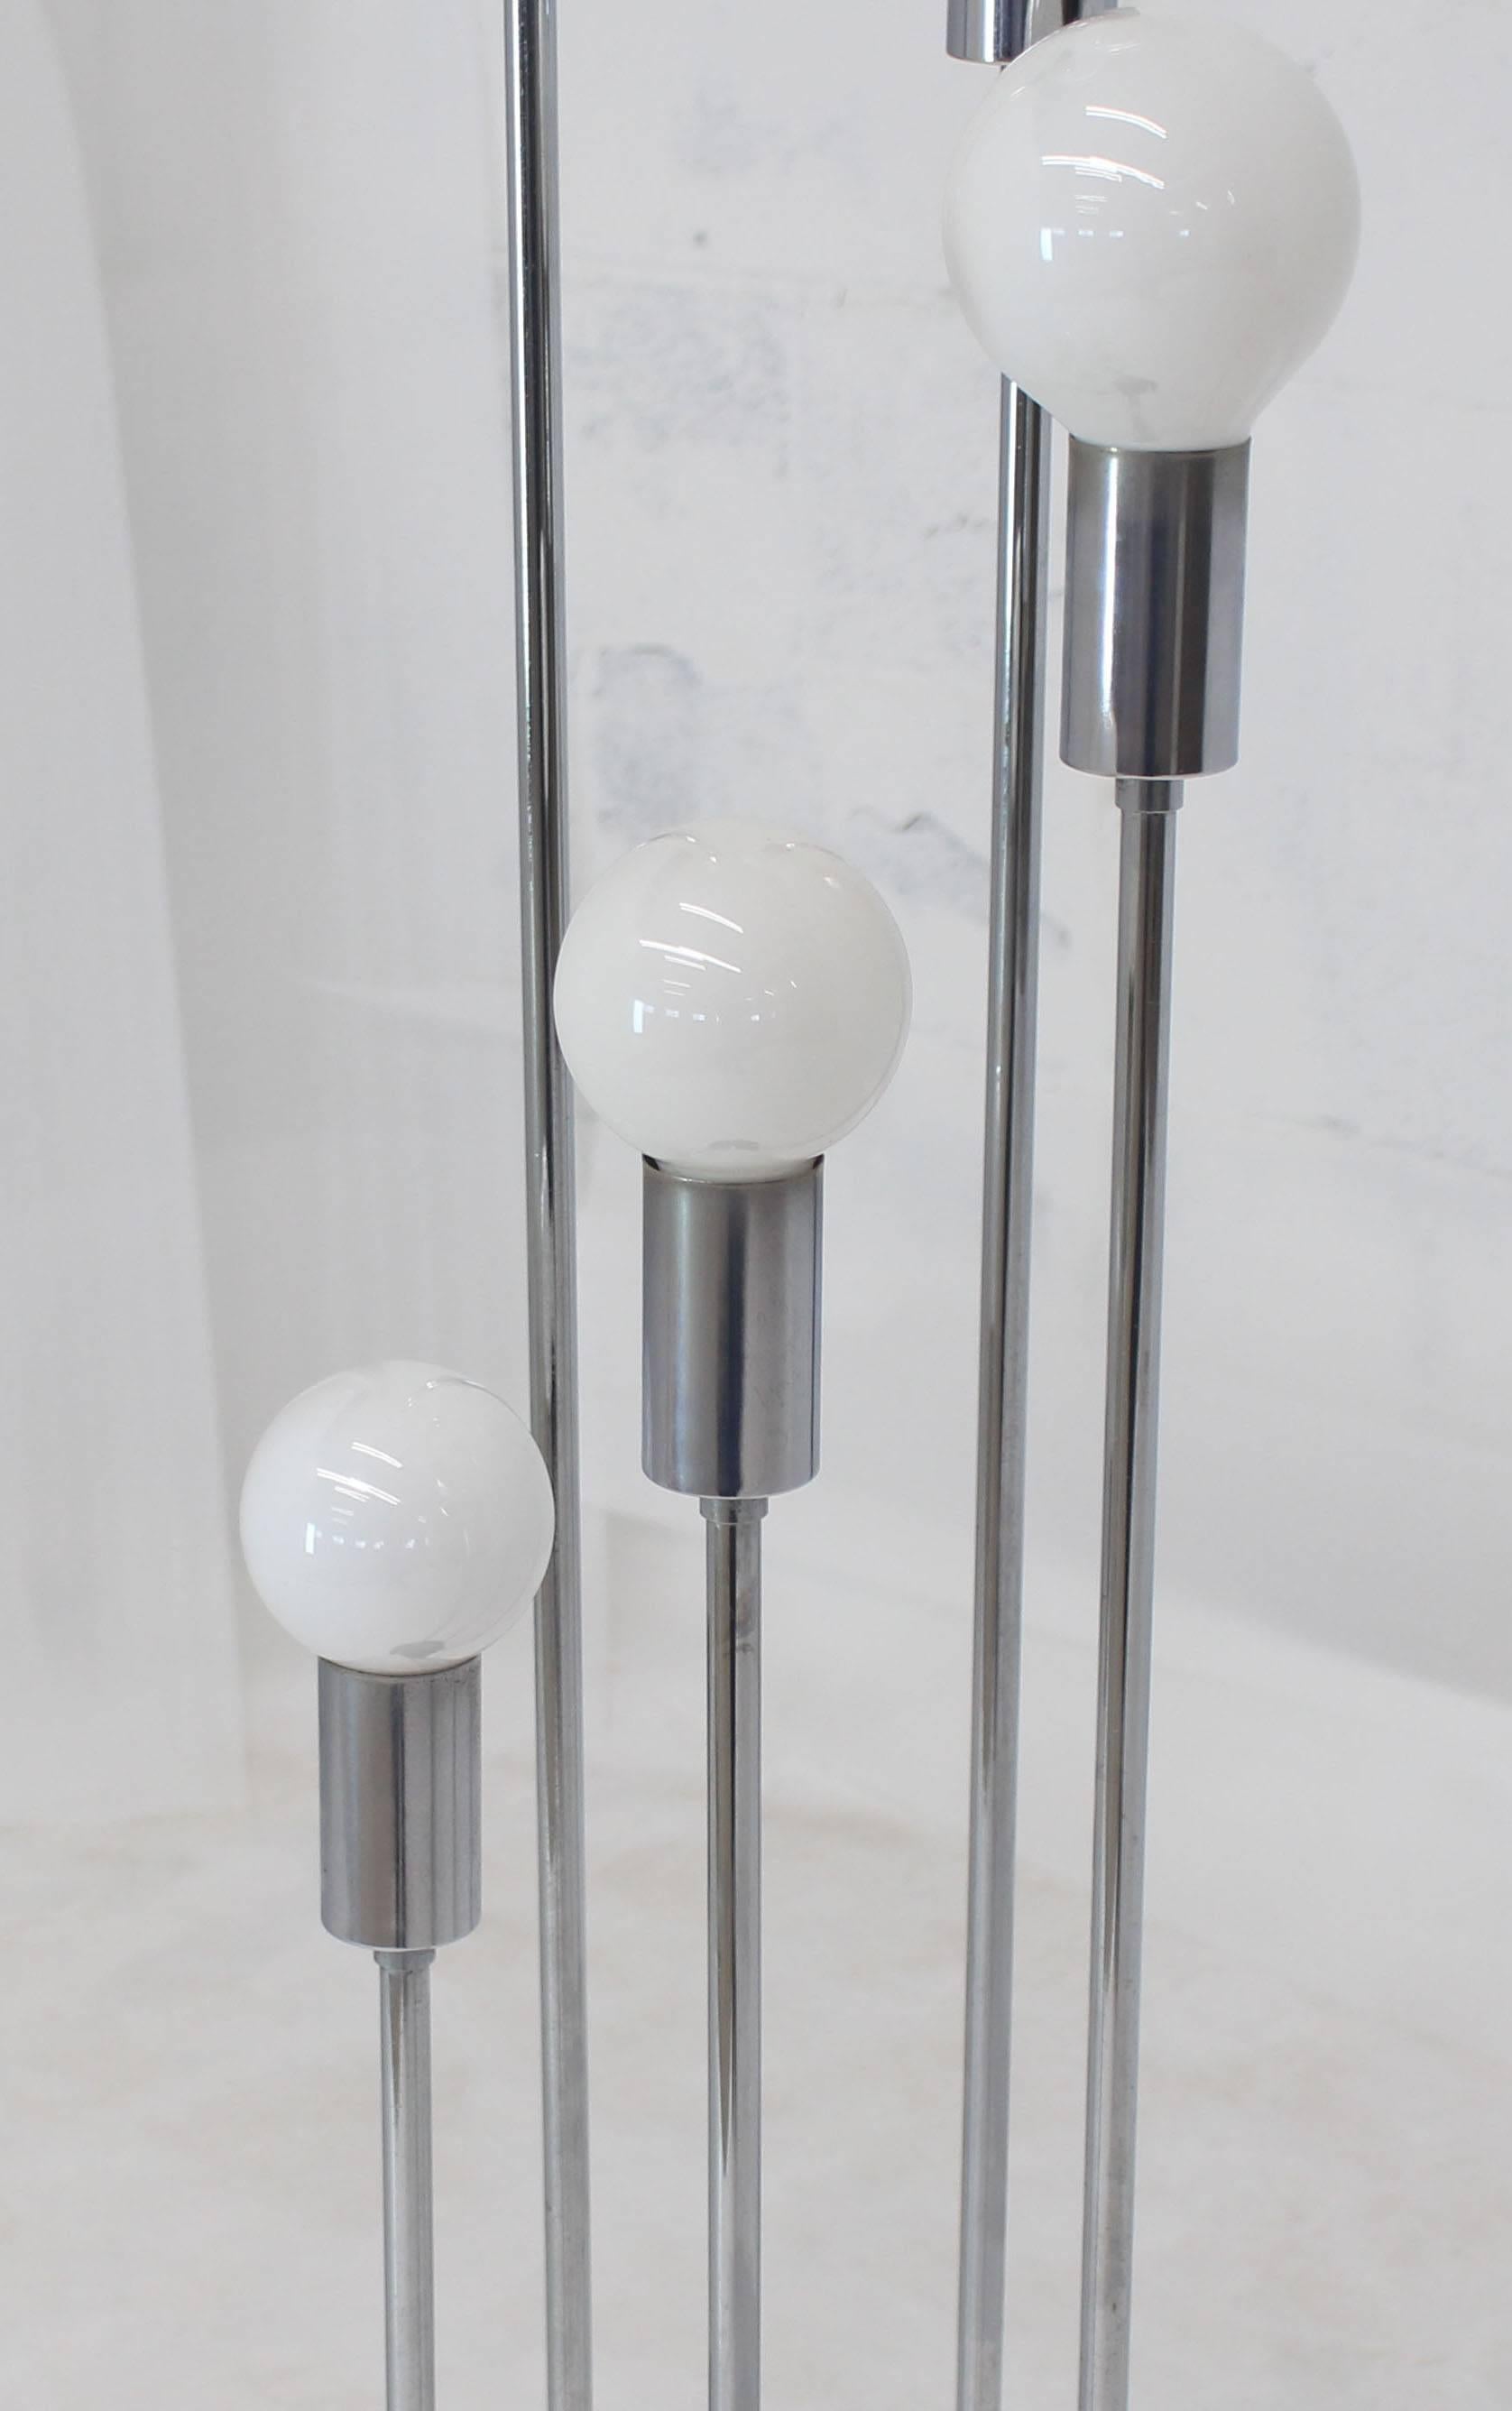 American 3 Way 5 Globes Spiral Chrome Mid Century Modern Floor Lamps on Round Base 